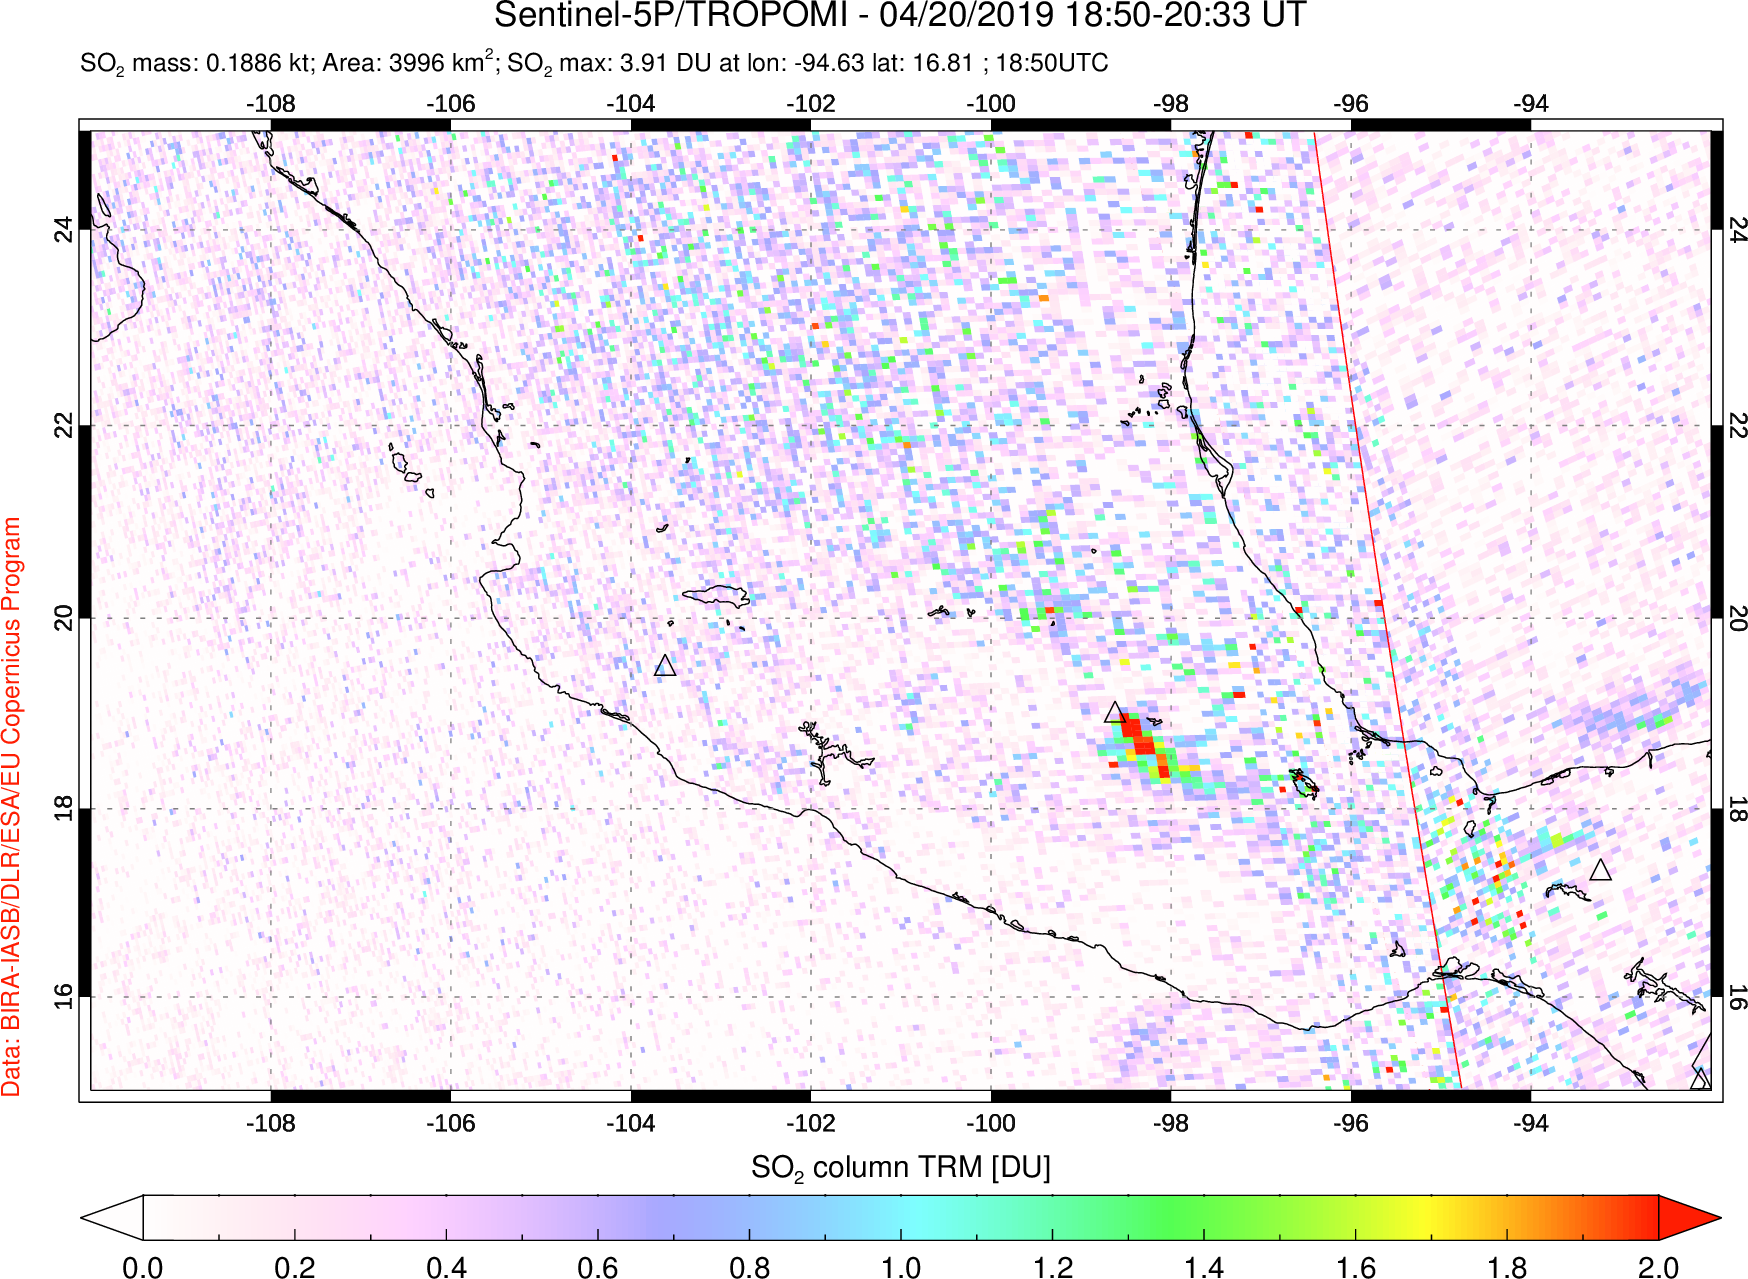 A sulfur dioxide image over Mexico on Apr 20, 2019.